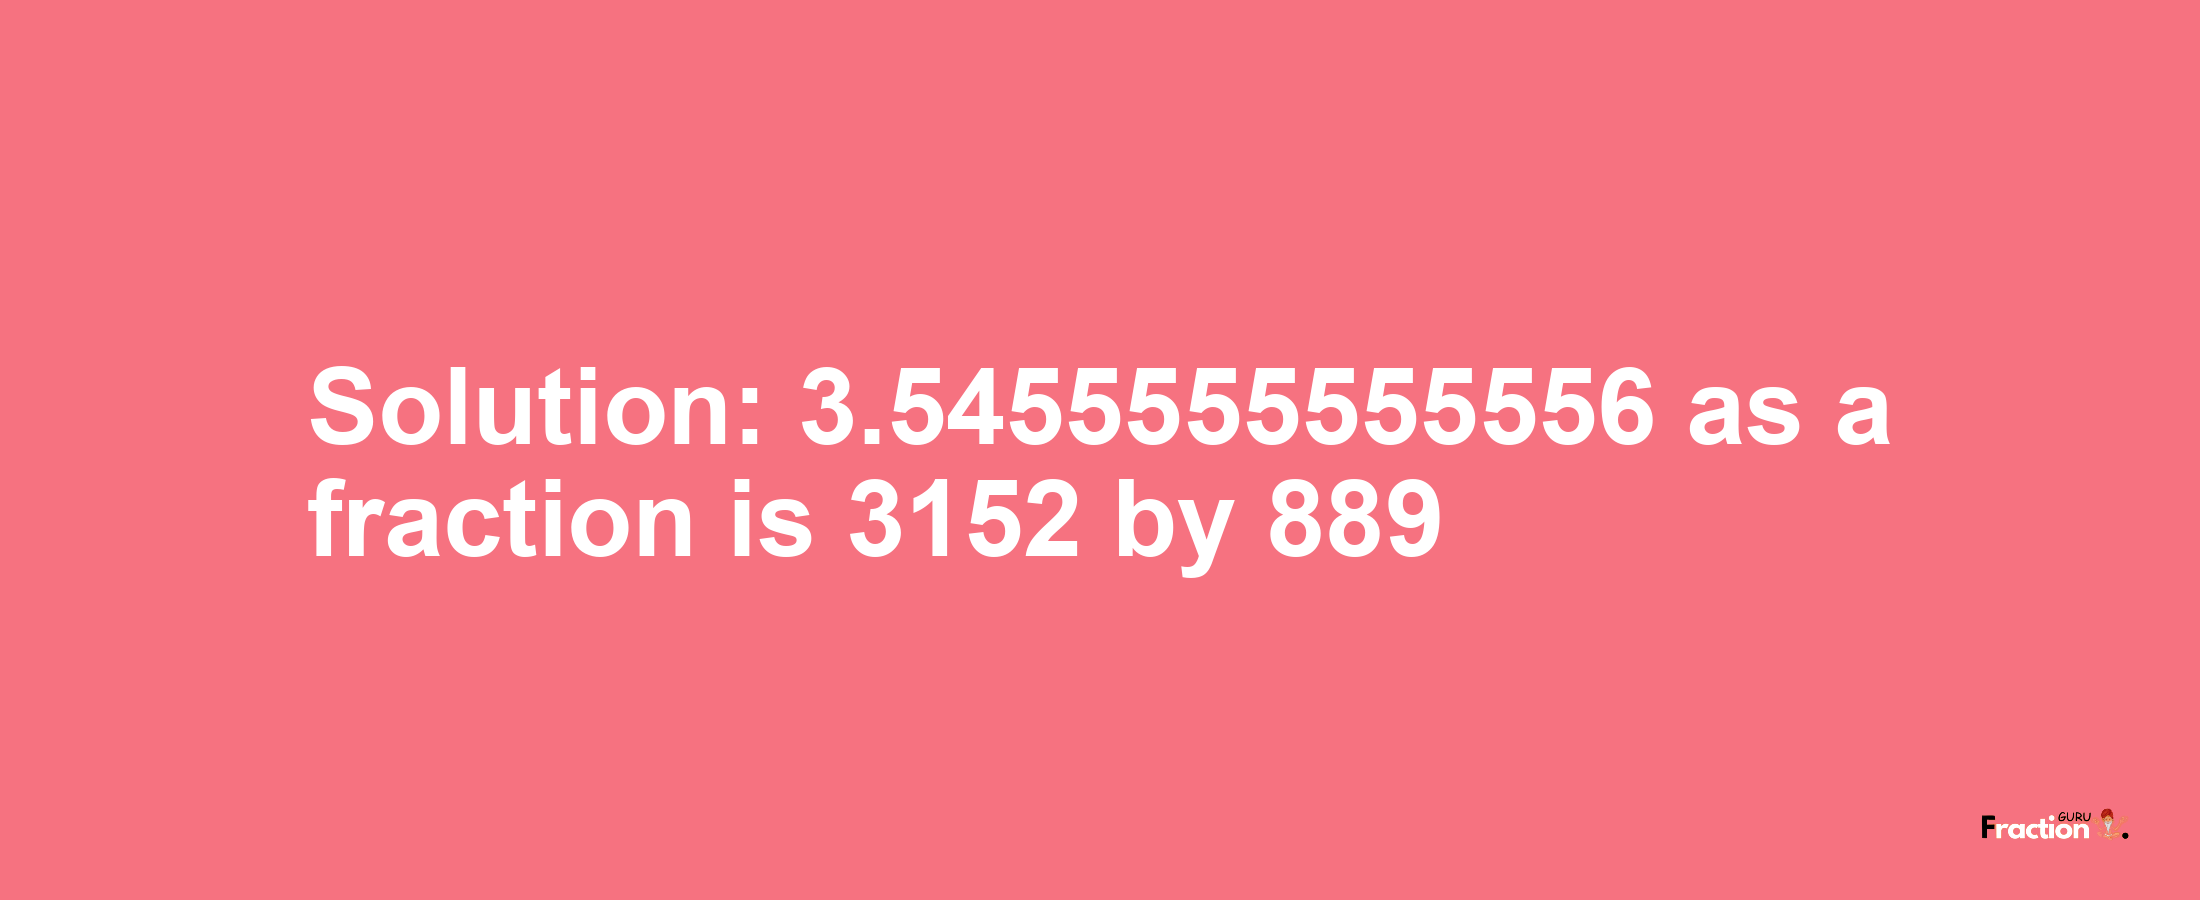 Solution:3.5455555555556 as a fraction is 3152/889